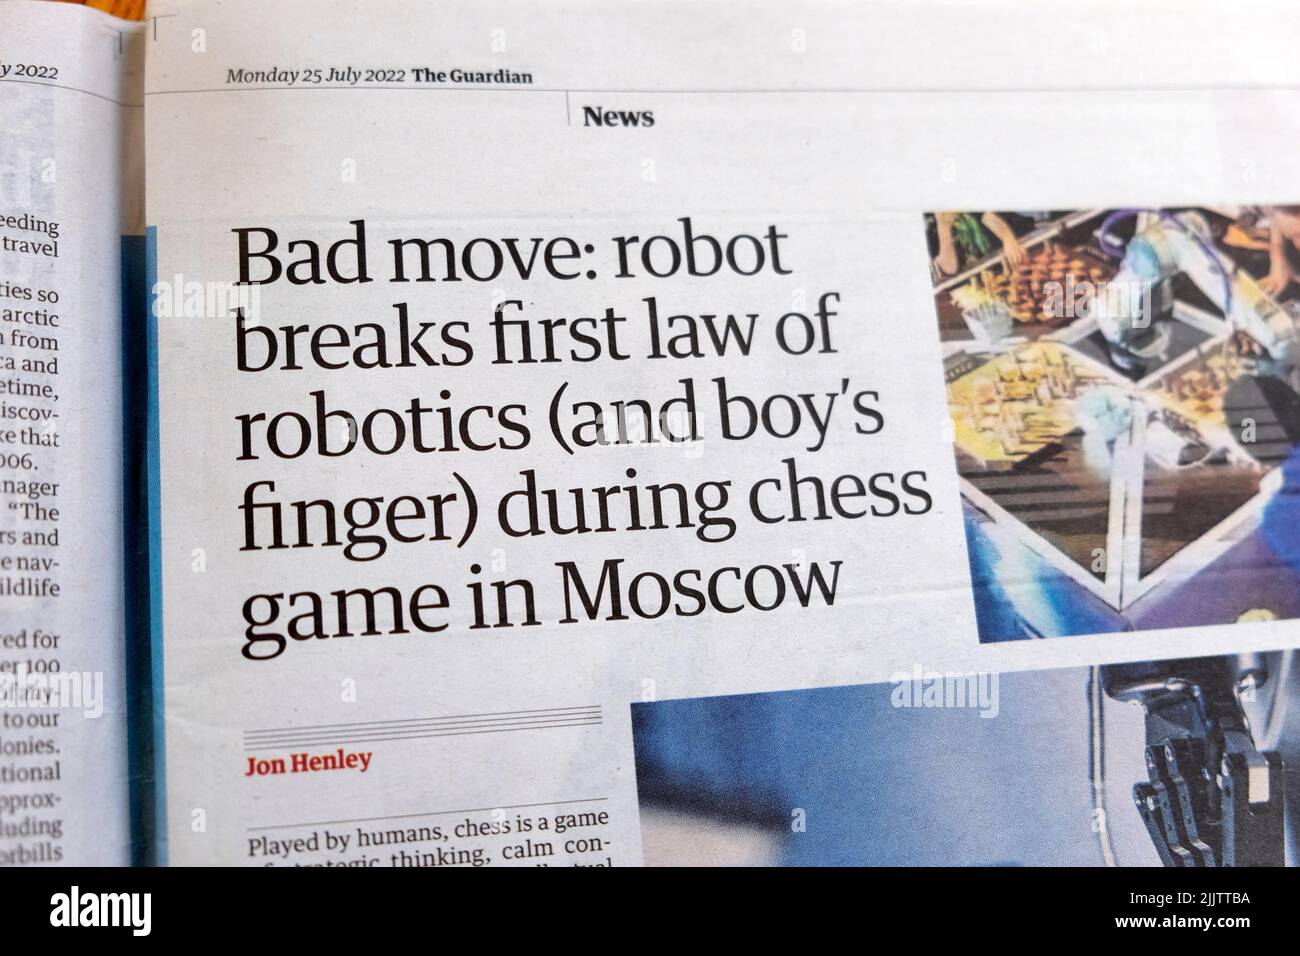 'Bad move: robot breaks first law of robotics (and boy's finger) during chess game in Moscow' Guardian newspaper headline news article 25 July 2022 UK Stock Photo